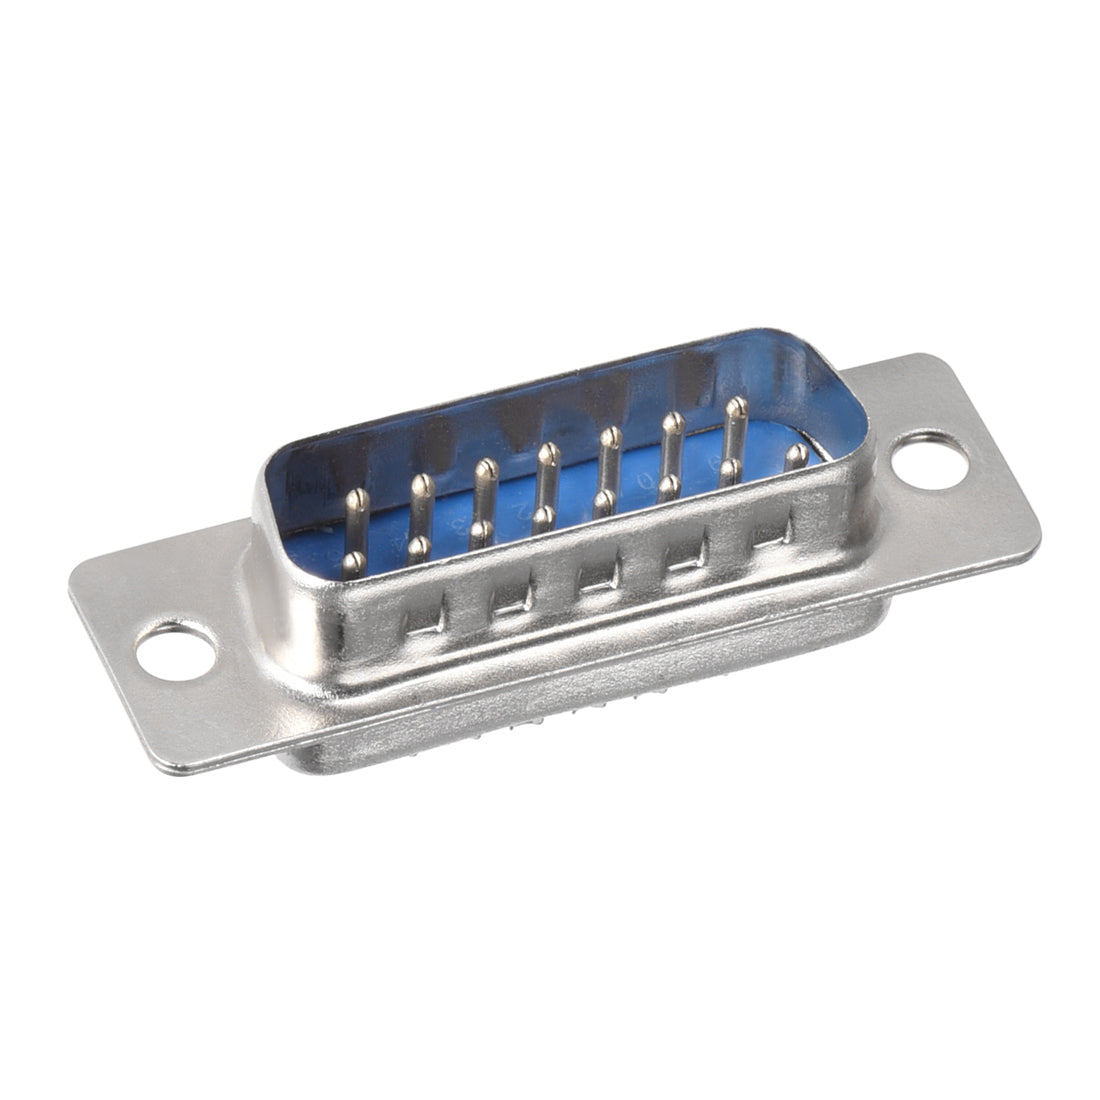 uxcell Uxcell D-sub Connector Male Plug 15-pin 2-row Port Terminal Breakout Solder Type for Mechanical Equipment CNC Computers Blue 5pcs